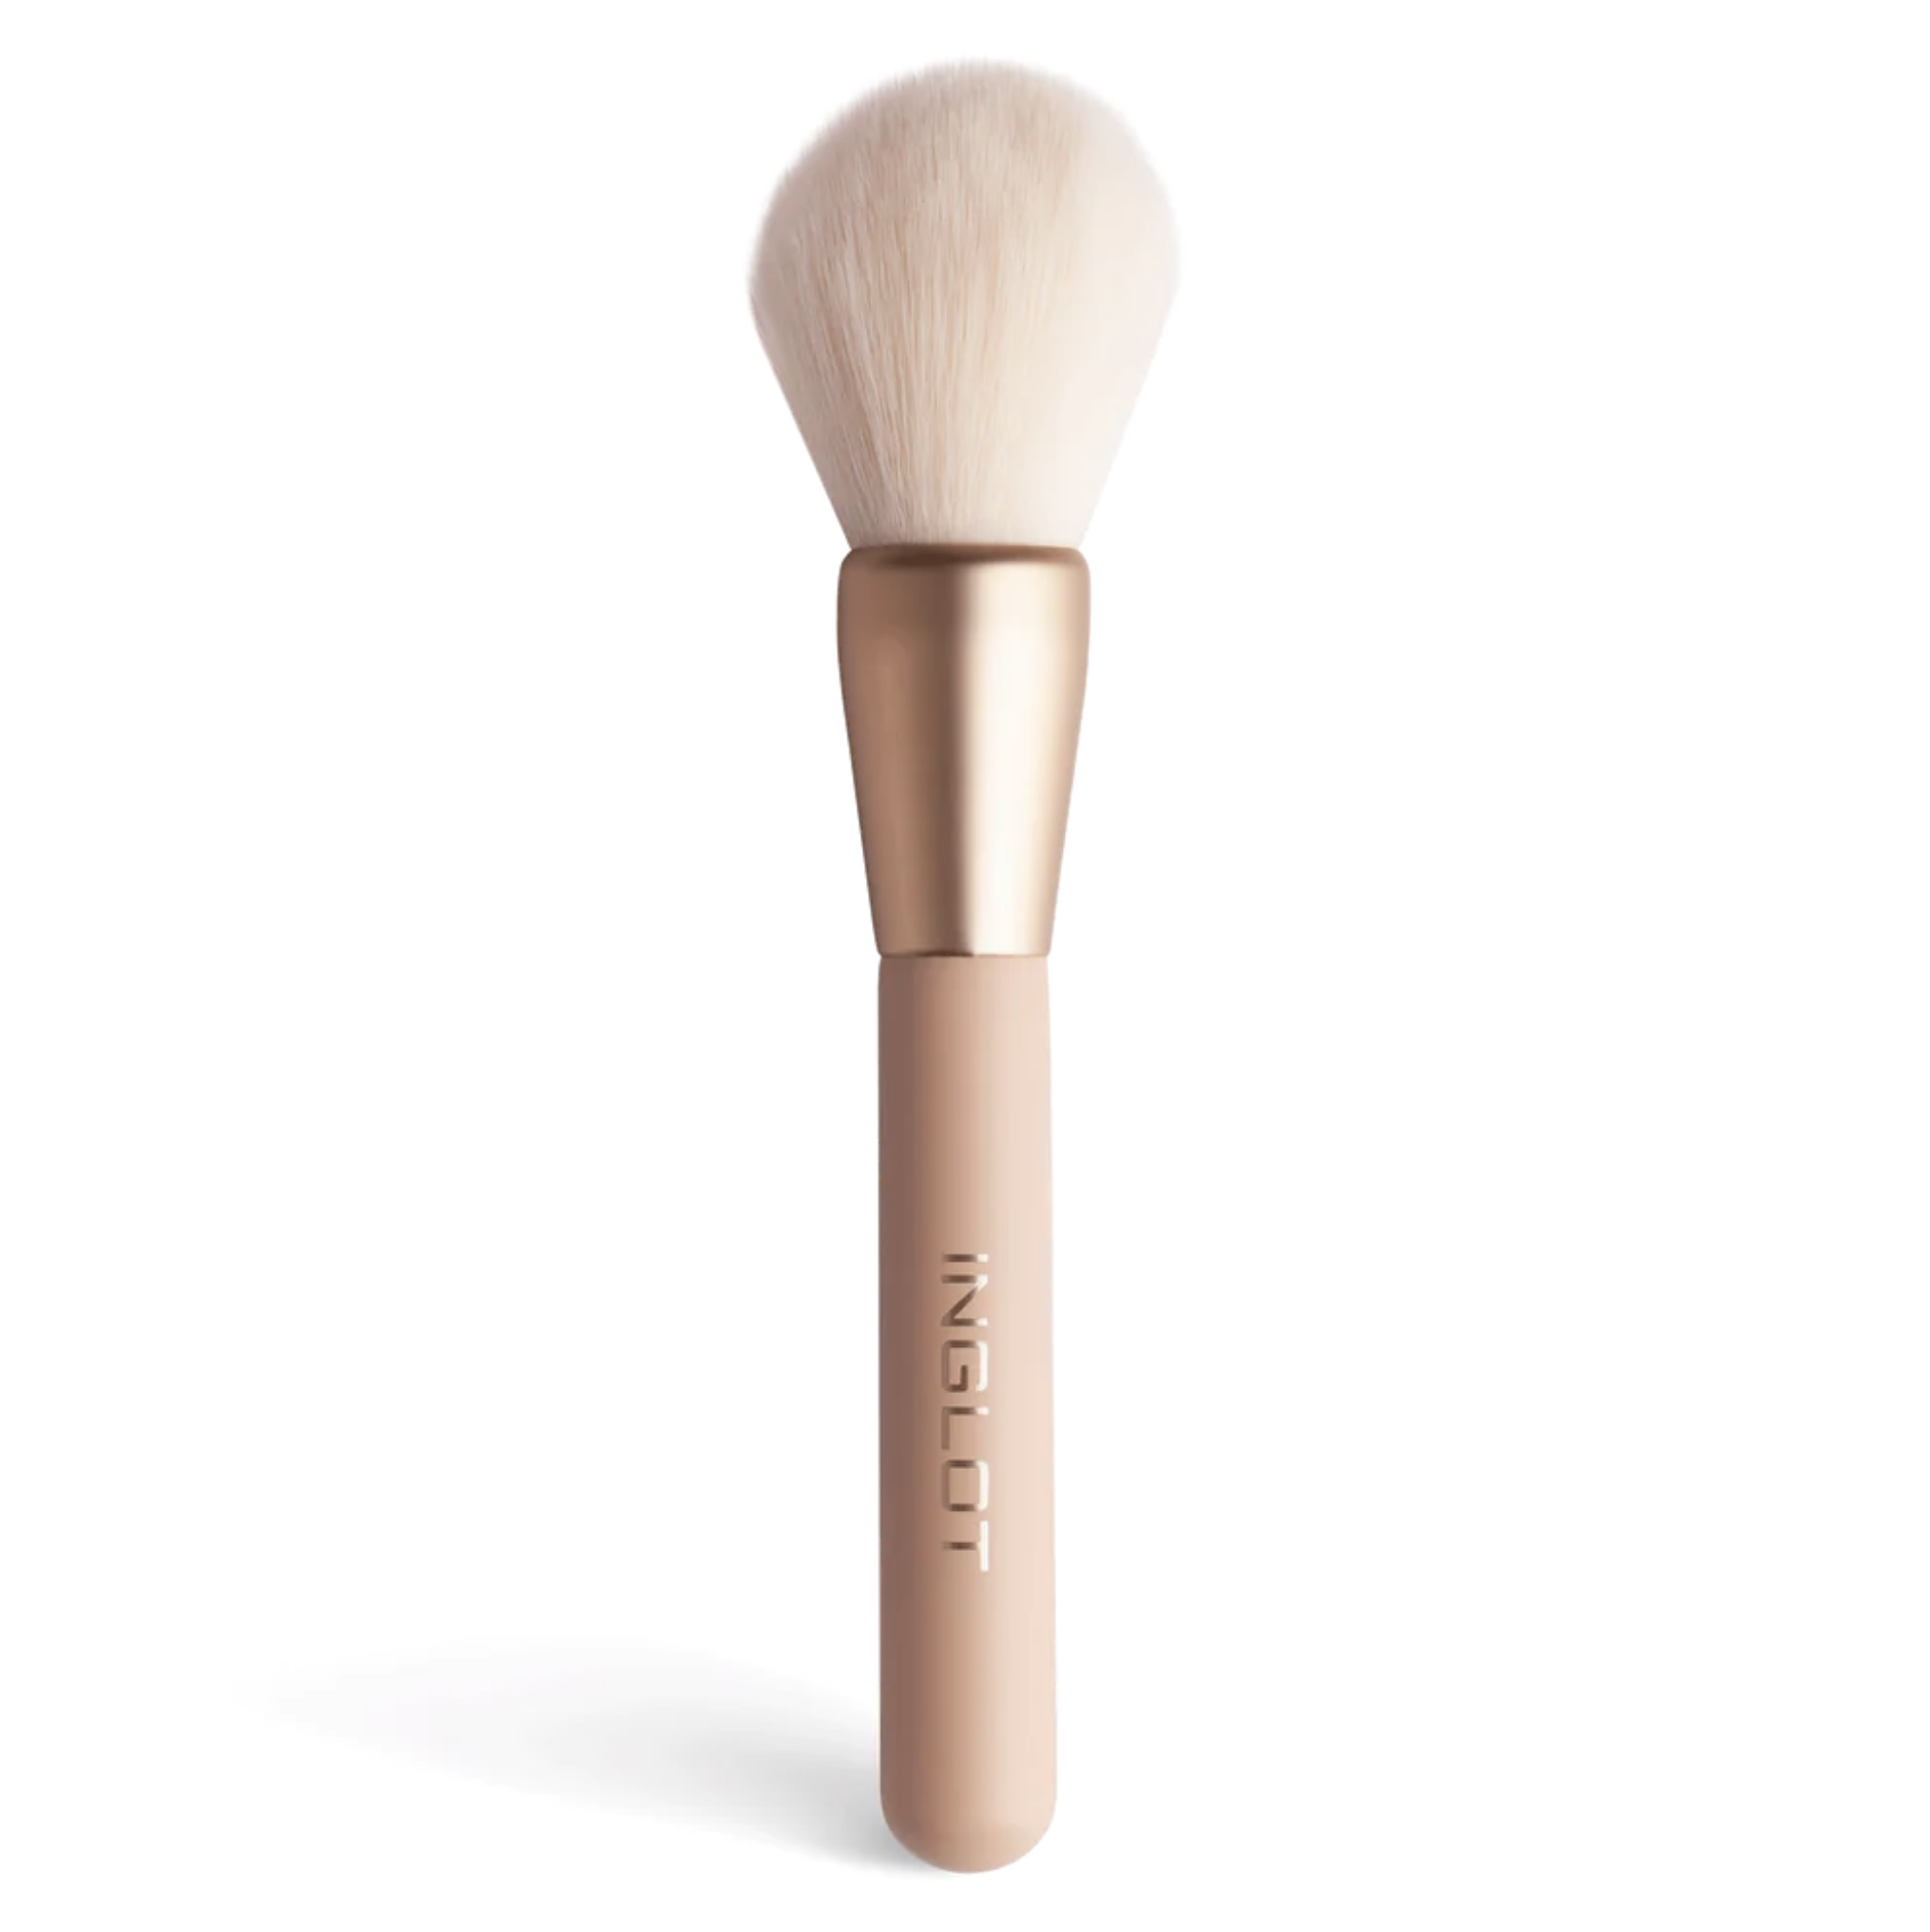 Inglot The Complete Beauty Tools Edit, large loose powder brush